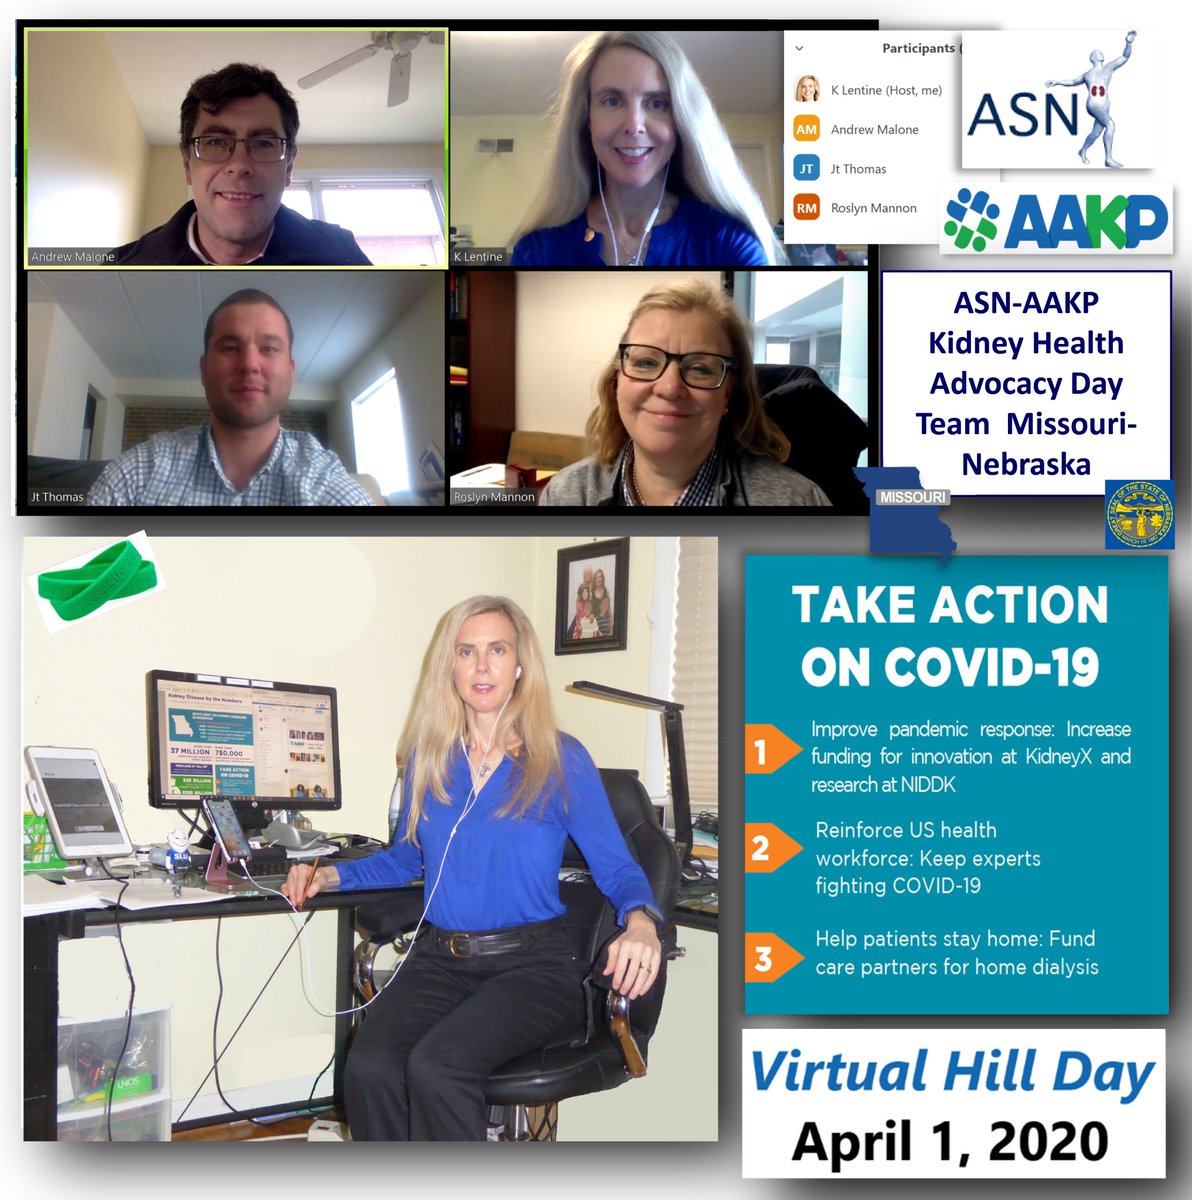 Proud to represent @ASNAdvocacy & #AAKPforPatients in #KidneyAdvocates #VirtualHillDay 🇺🇸2020. 🙏🏻Offices of @RoyBlunt @SenatorFischer #DonBacon #BenSasse & @SenHawleyPress for mtgs on unique needs of #KidneyPatients & #HealthCareWorkers during #COVID19 pandemic. #KidneysontheHill